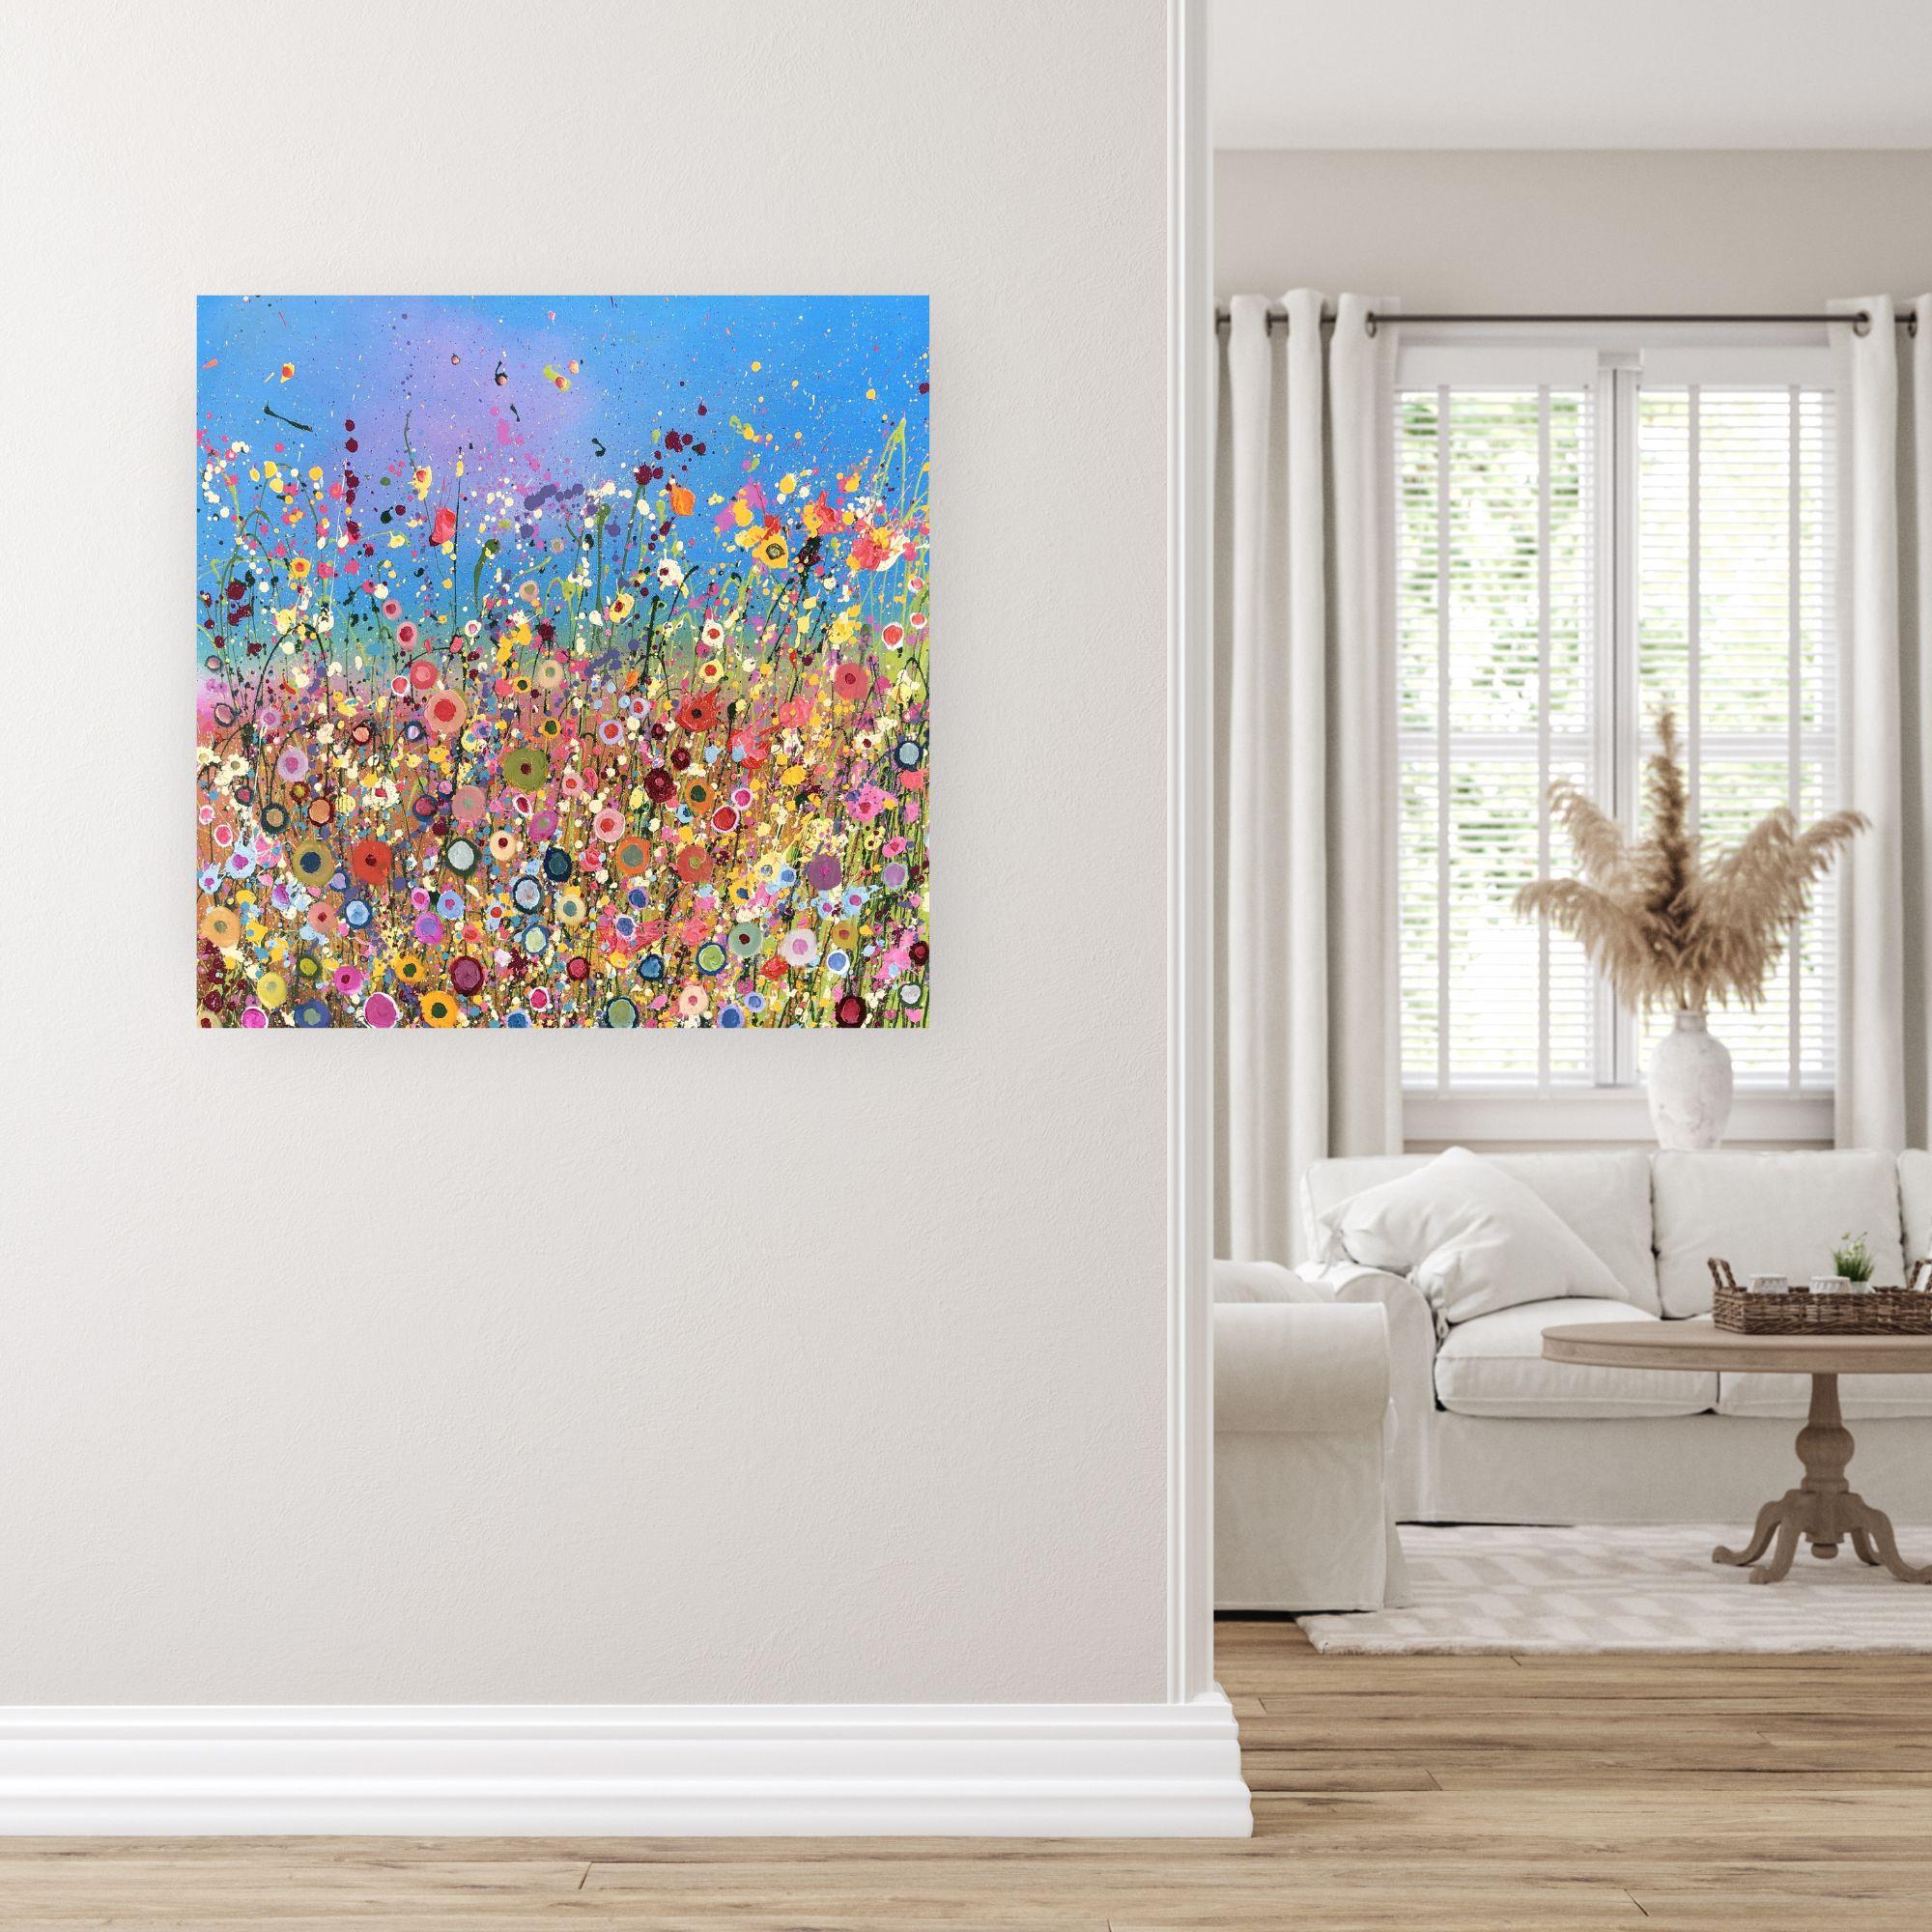 Our Beautiful Shimmering Hearts-Original landscape floral painting-abstract art  - Painting by Yvonne Coomber